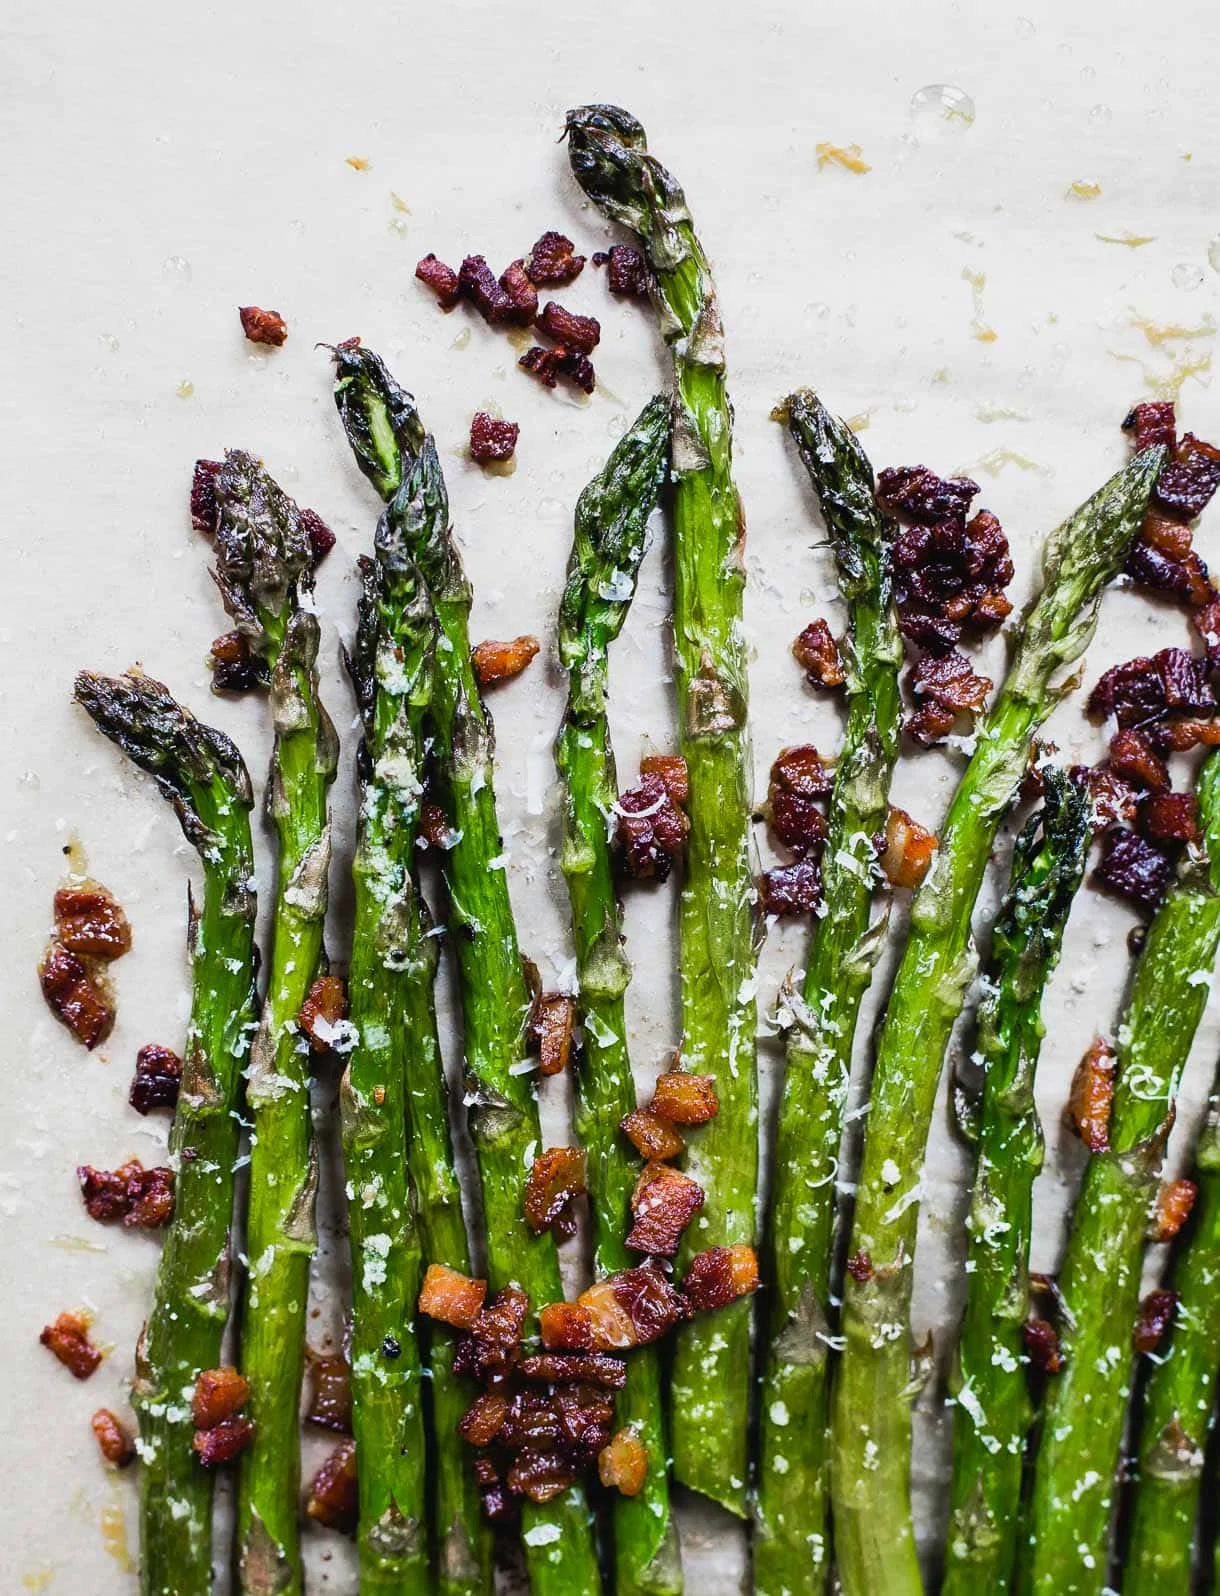 Best Asparagus Recipe Ever! With bacon and parmesan.